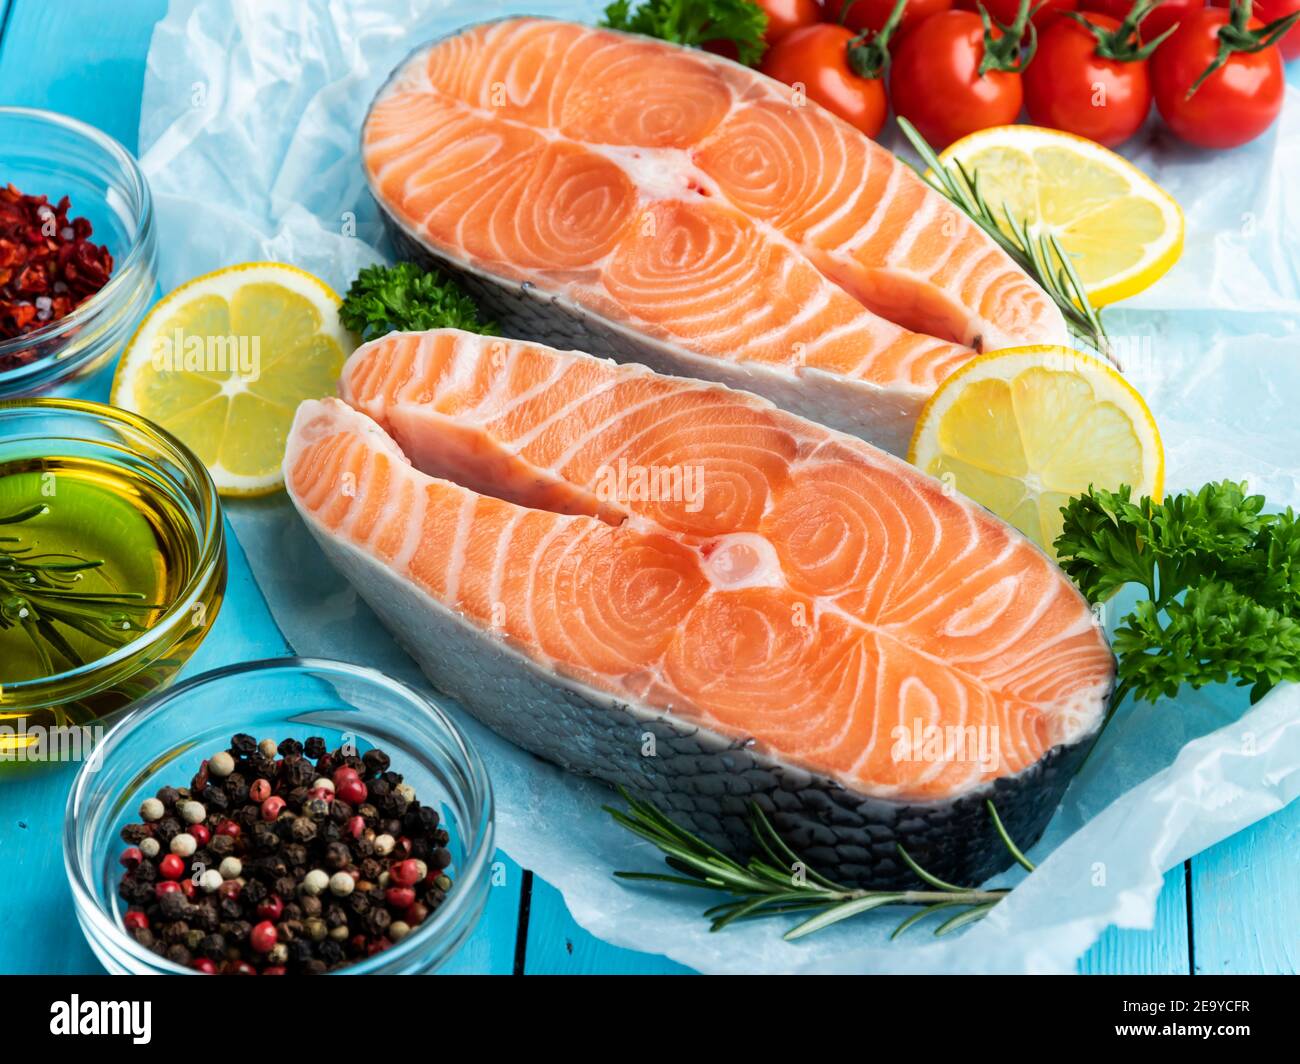 two raw fresh steak fish trout, salmon and spices on a blue wooden background Stock Photo